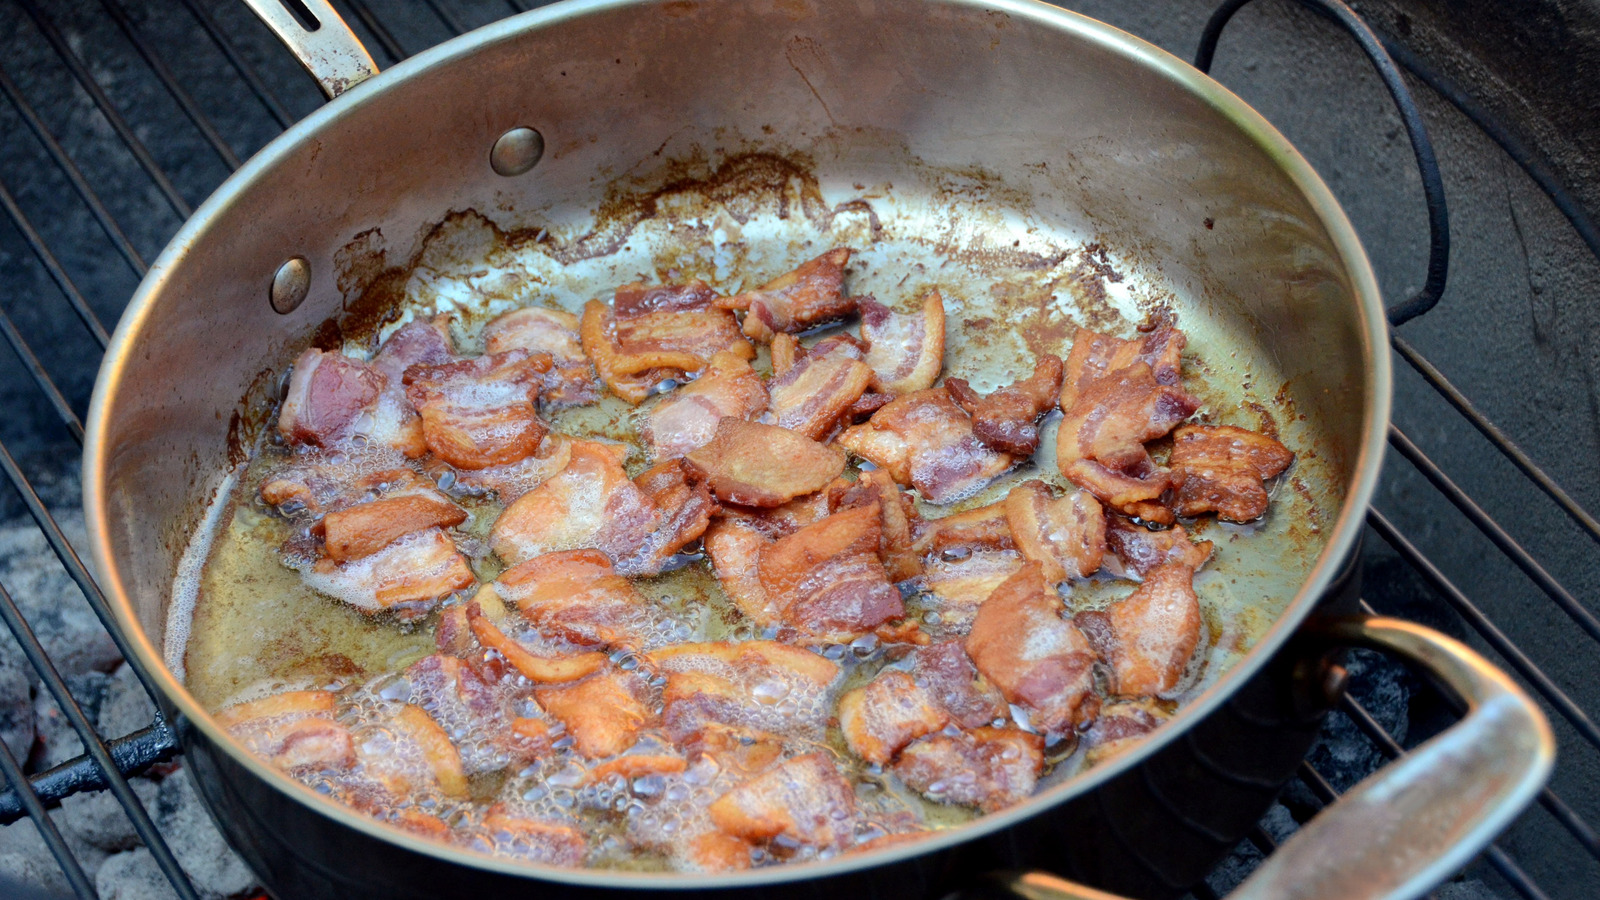 15 Uses For Bacon Grease - Southern Plate